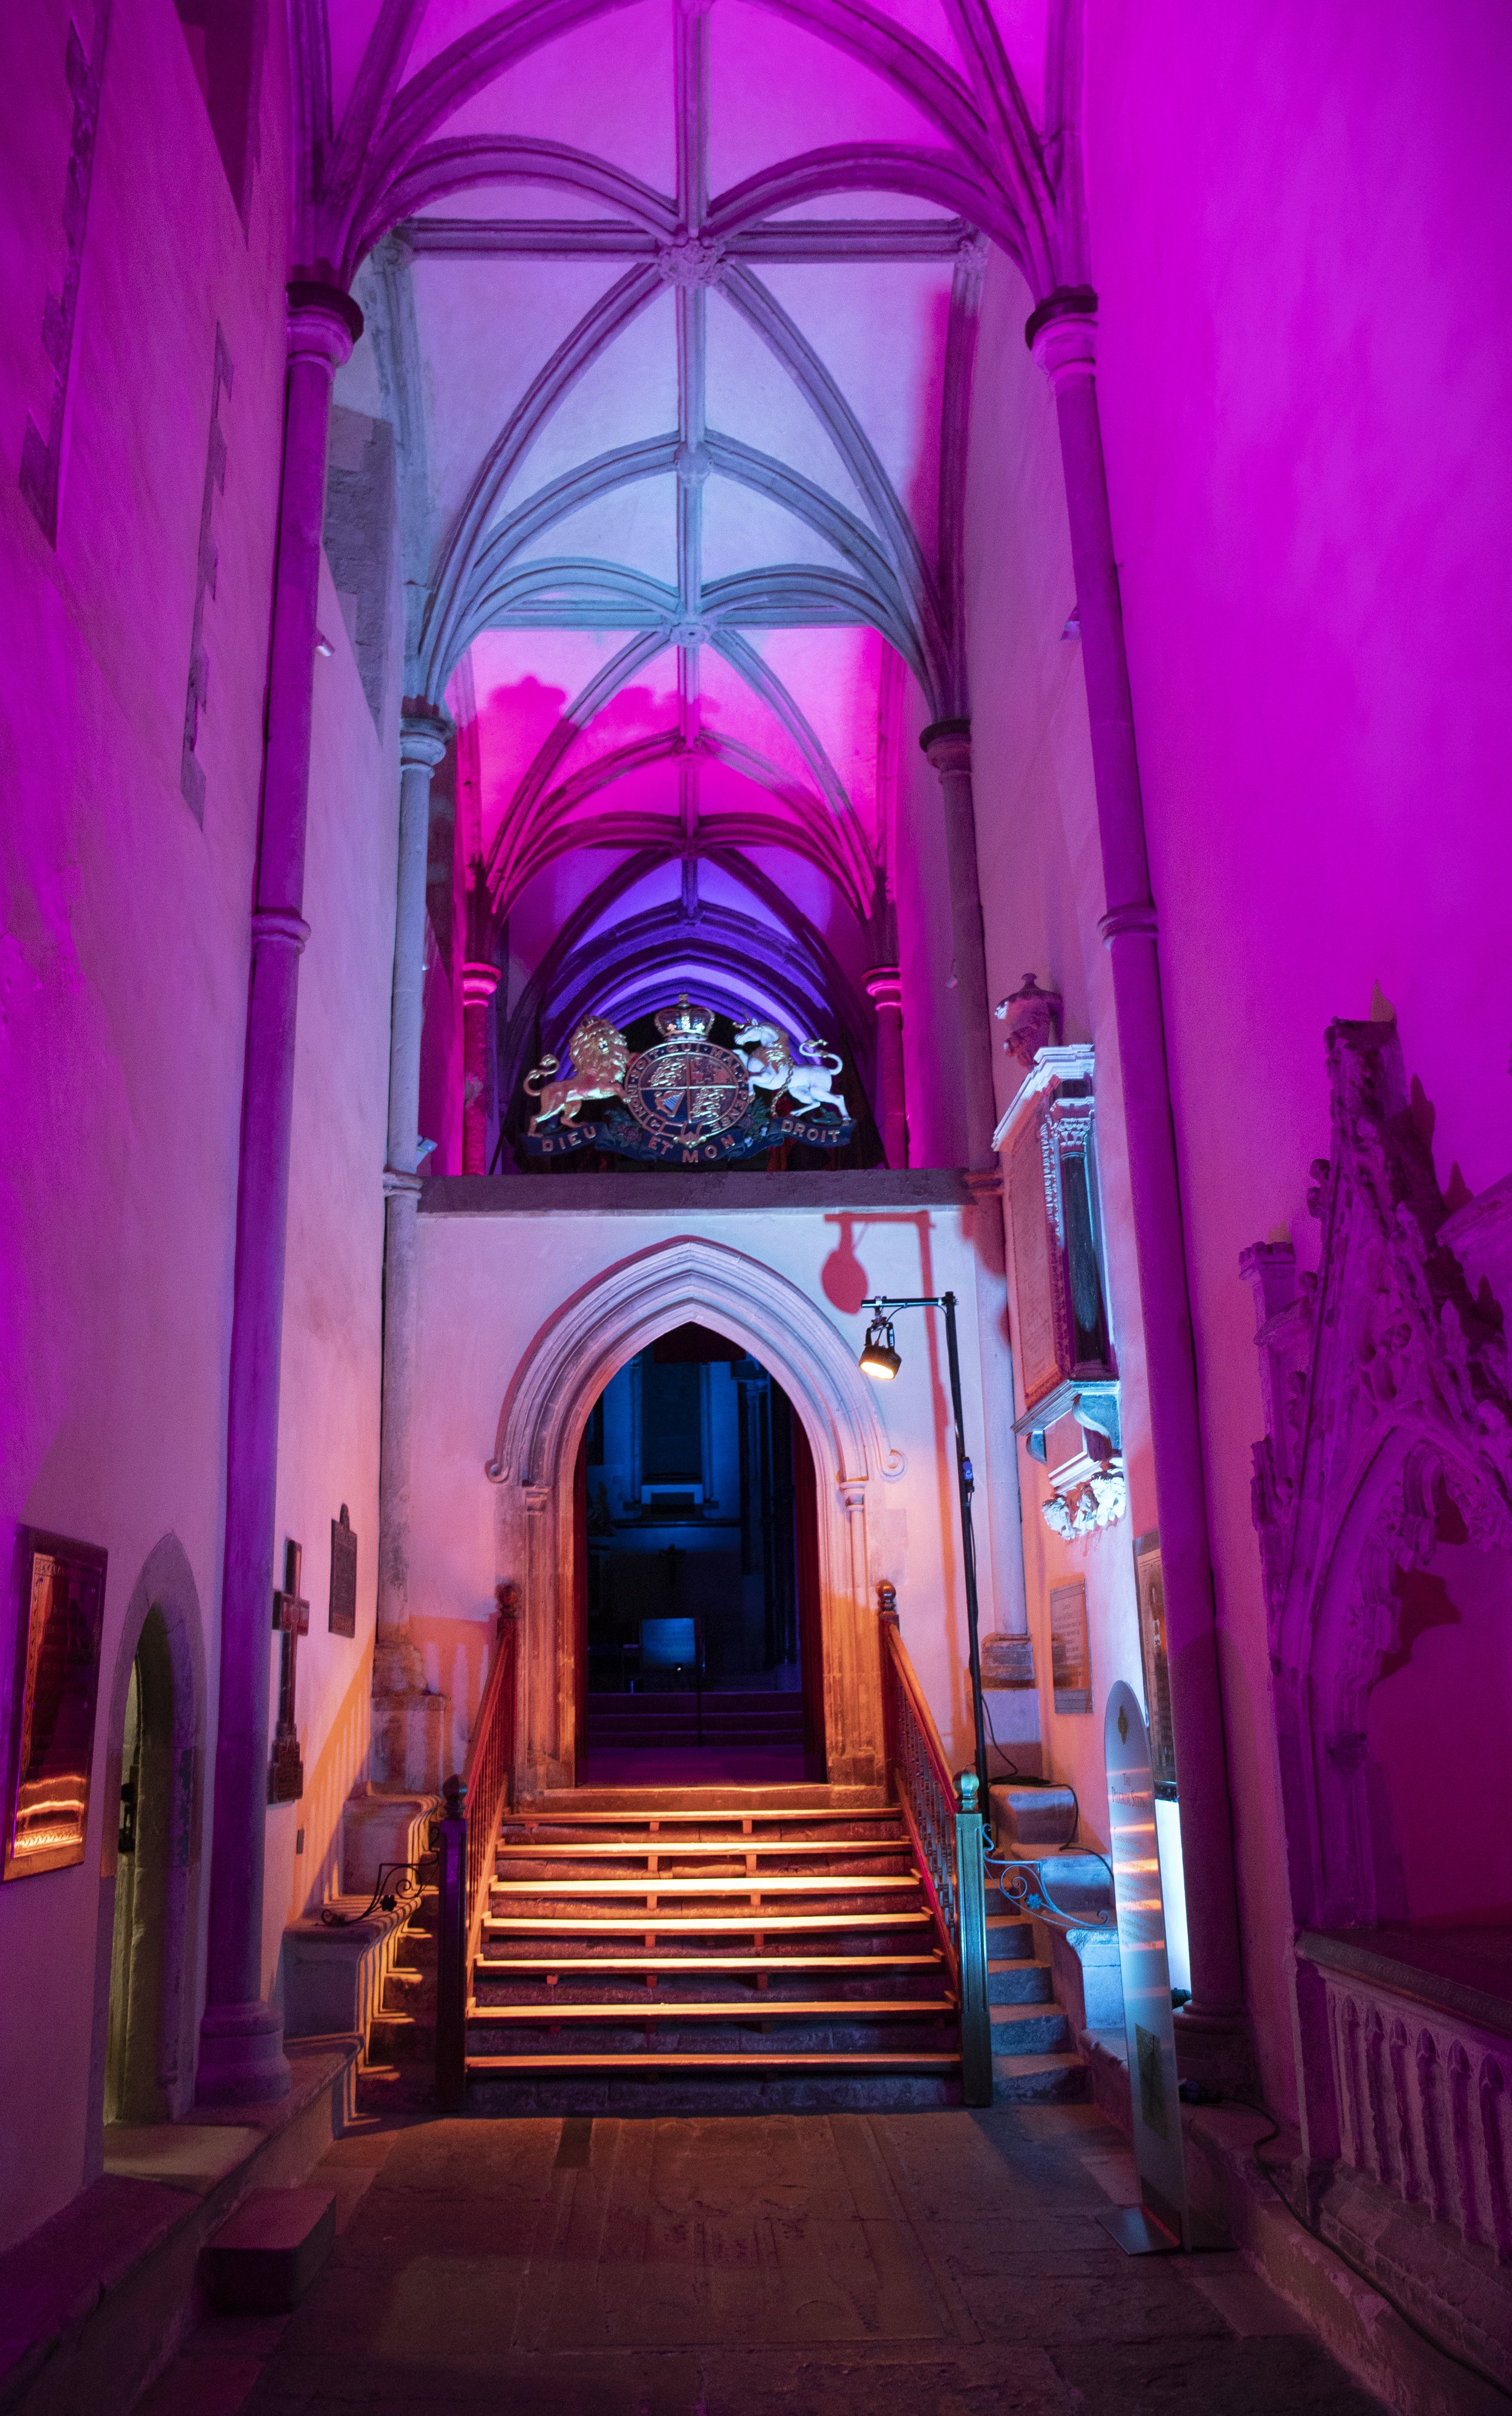 Rochester Cathedral space voyage Luxmuralis 2021_1 - Copy.jpg